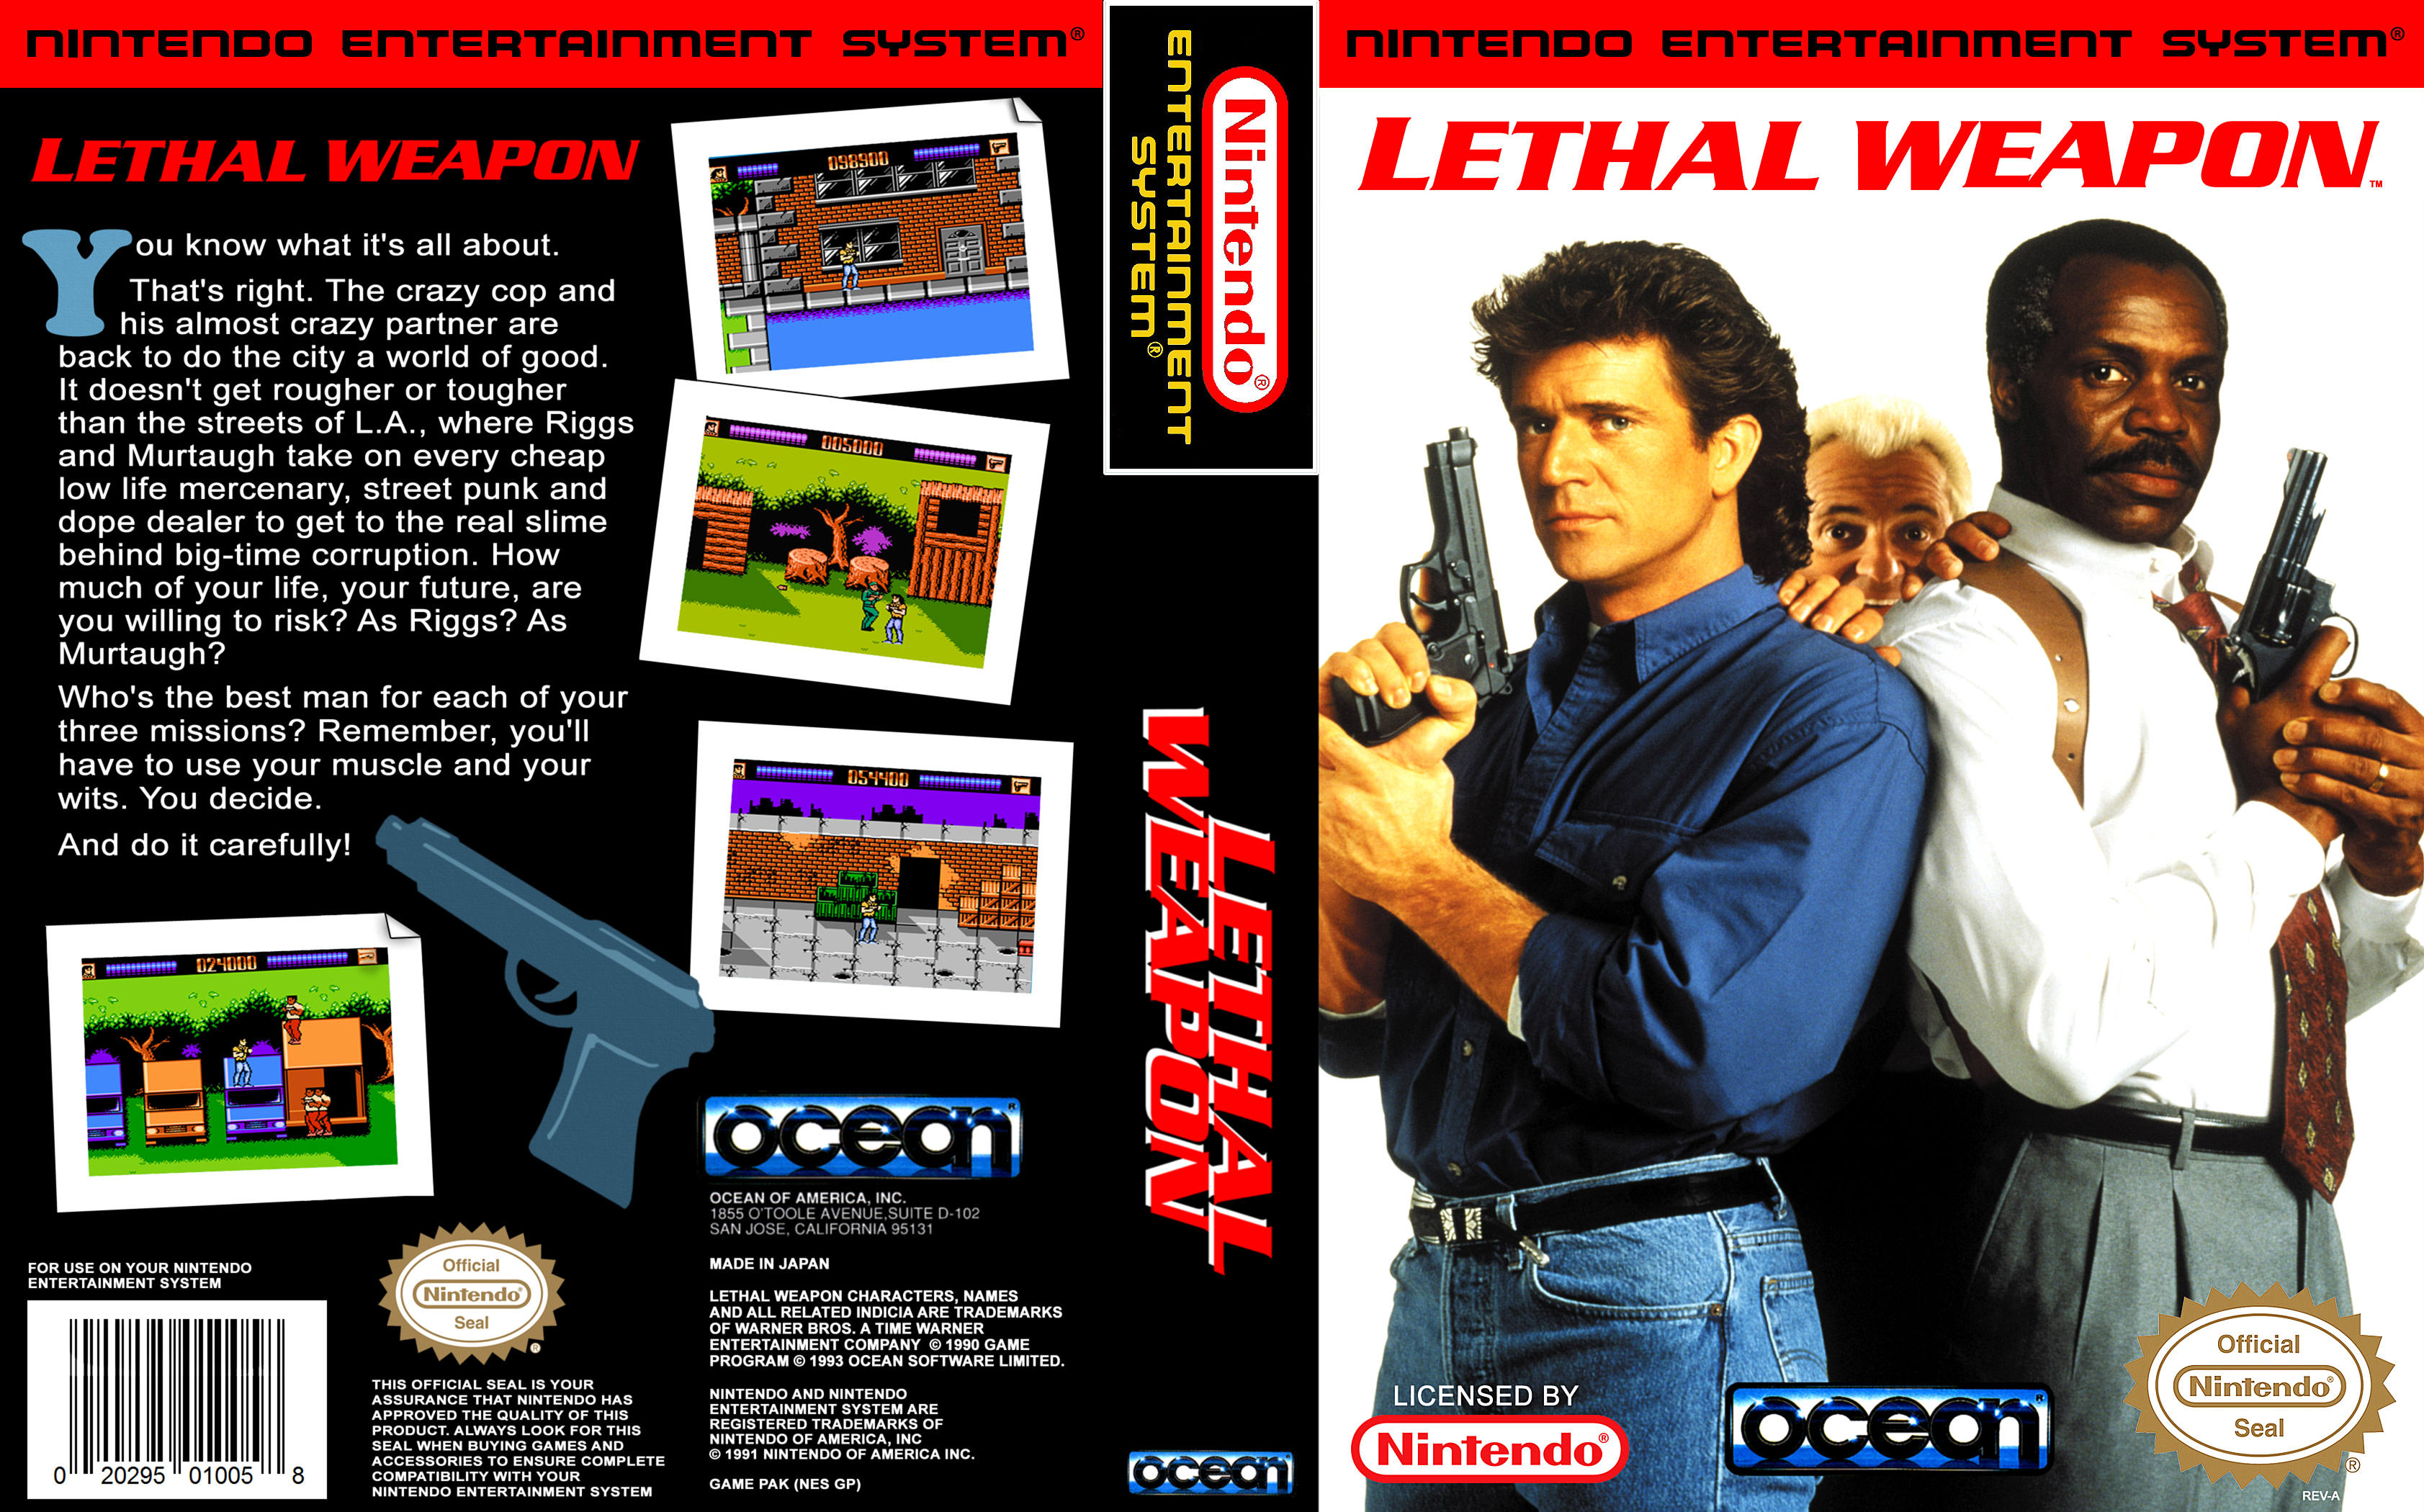 Lethal Weapon Денди. Lethal Weapon NES обложка. Dendy Lethal Weapon 2. Weapon игра Денди.. Lethal company минимальные